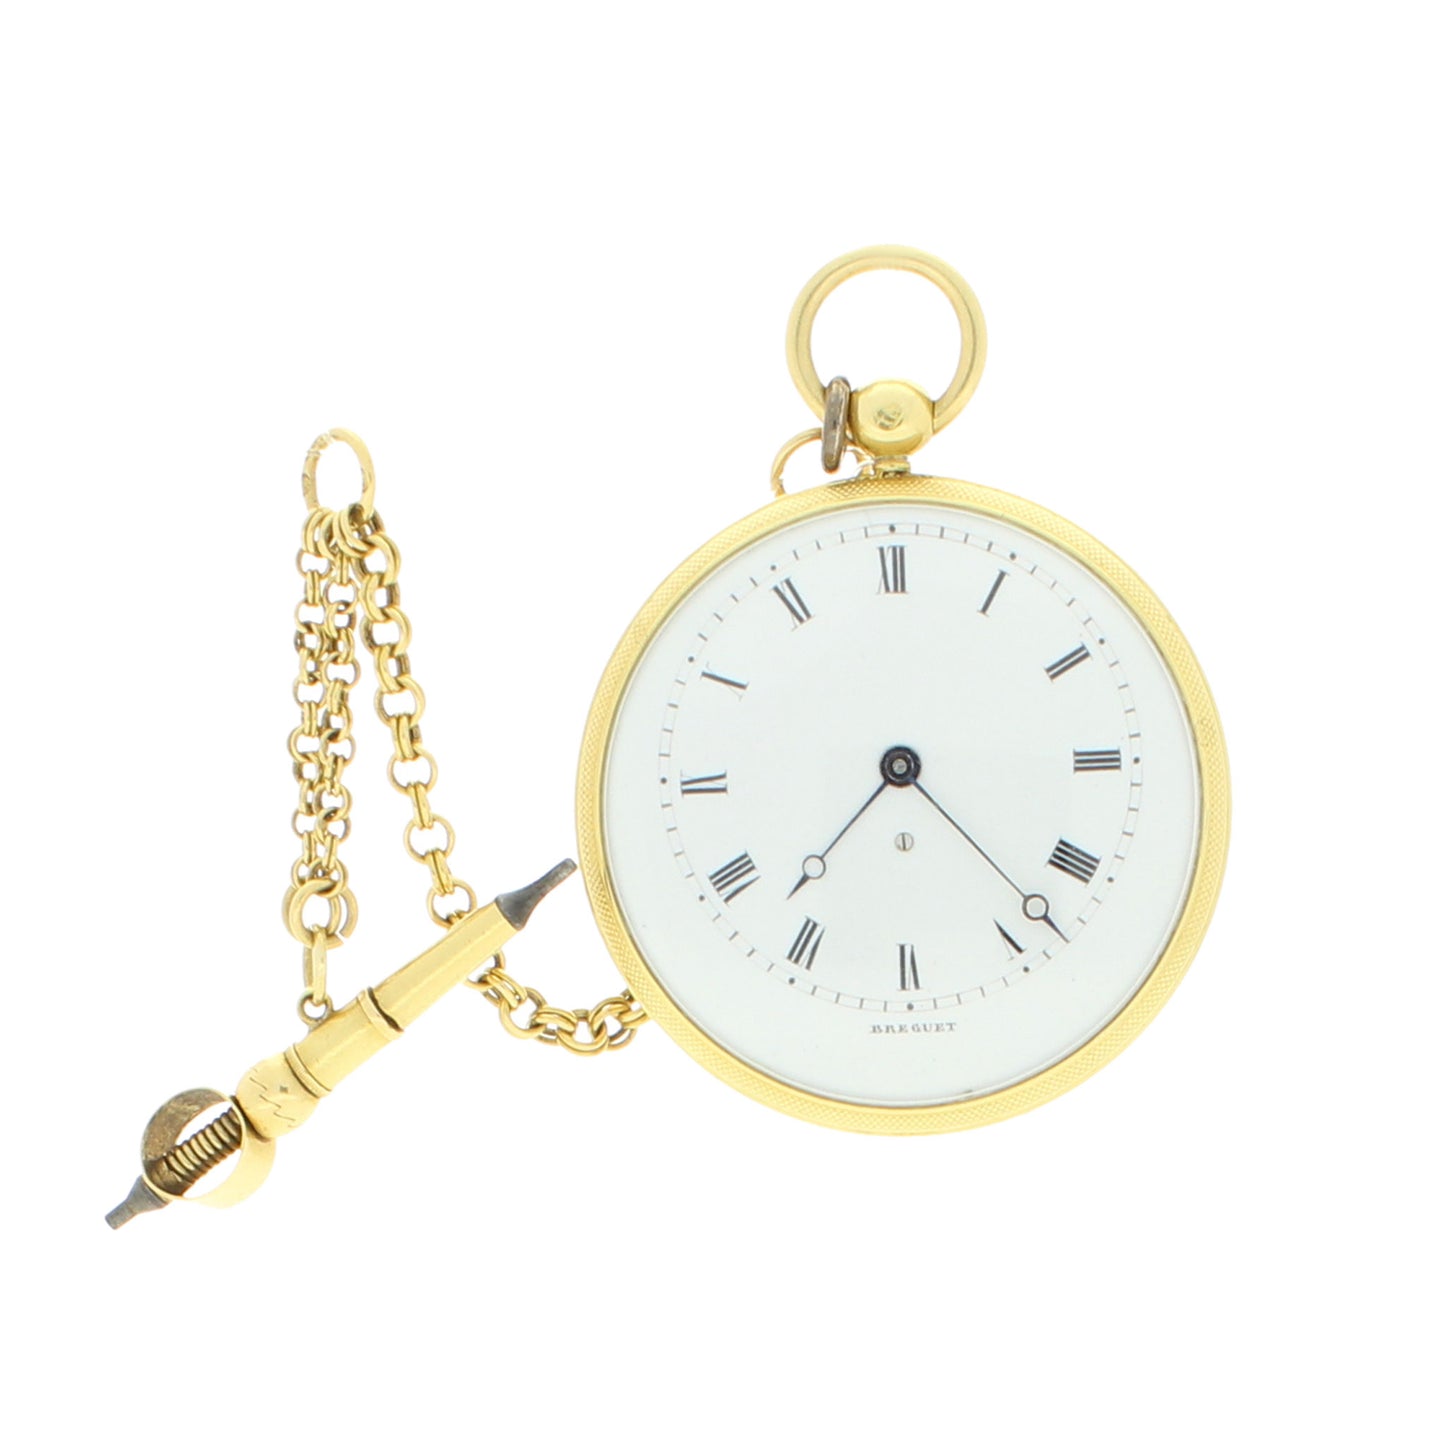 18ct yellow gold miniature open face pocket watch with chain. Made 1840’s